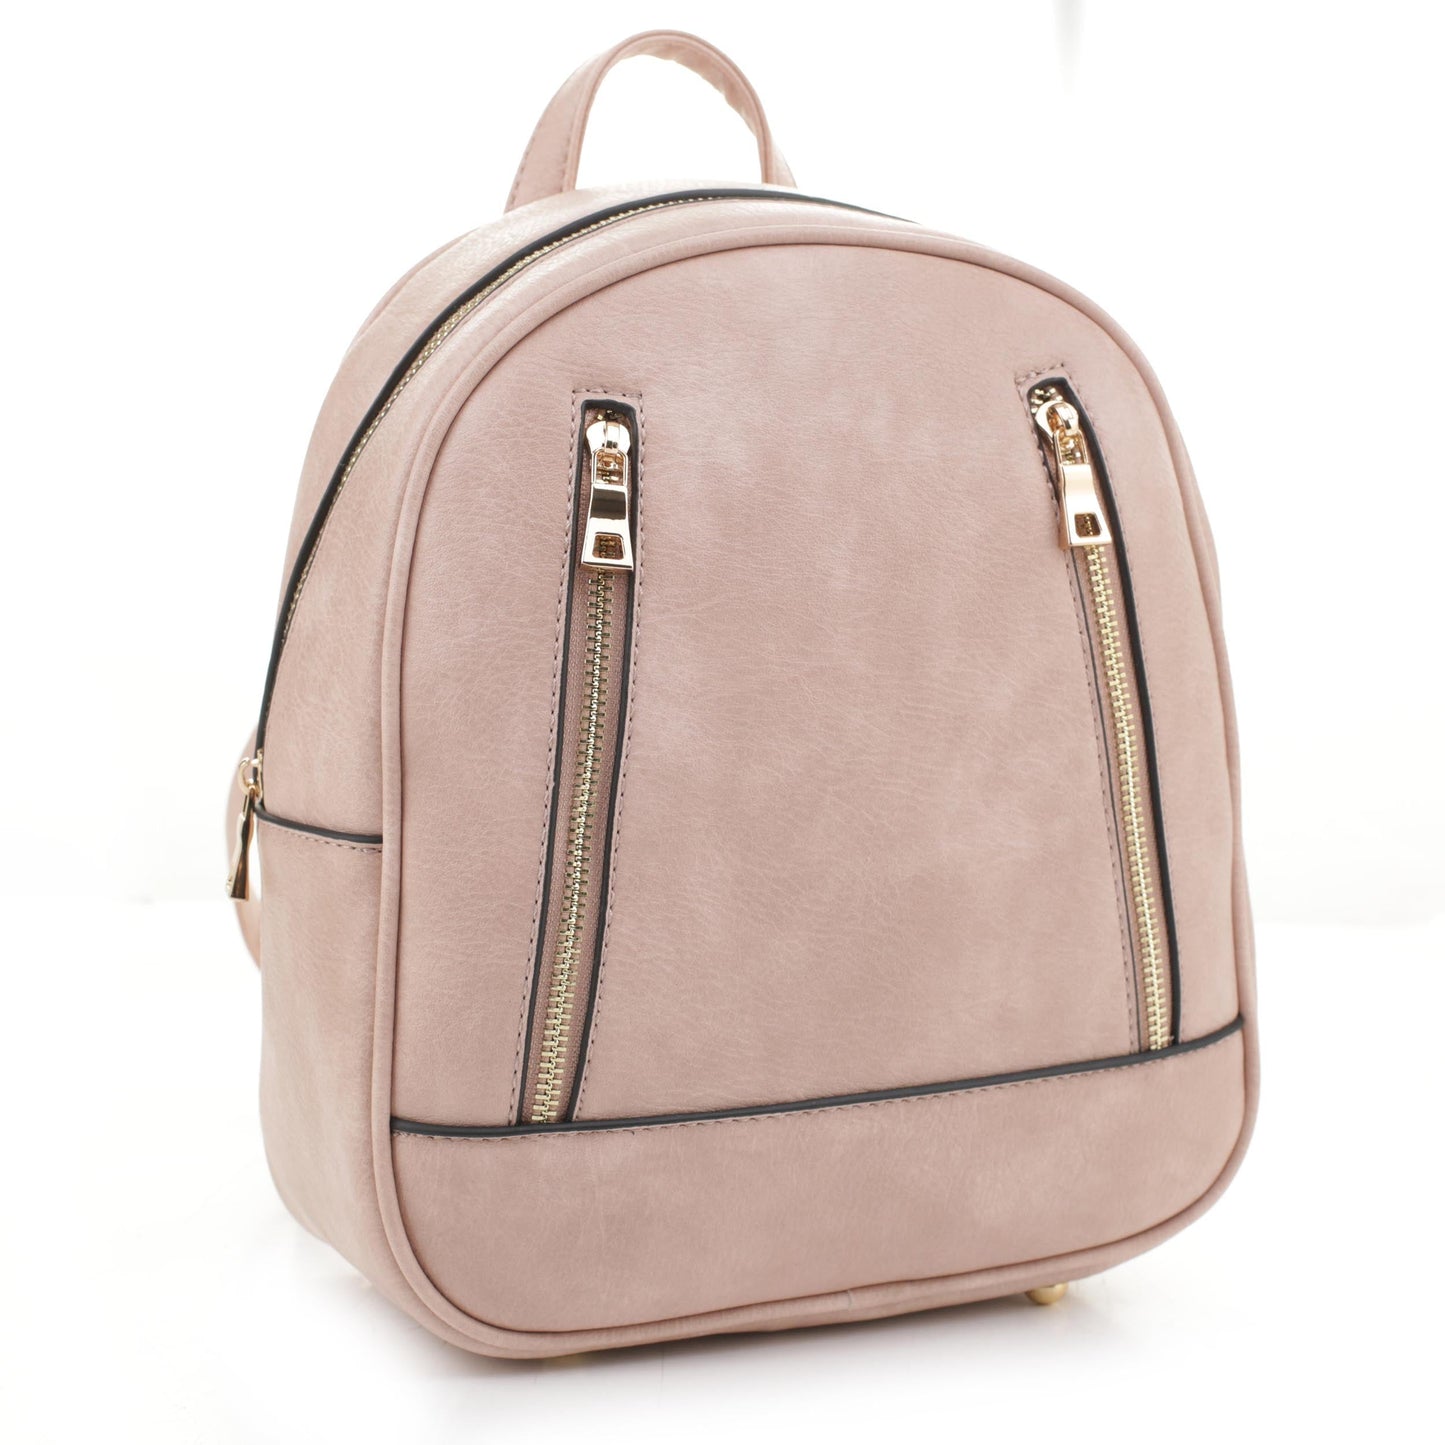 Double Front Zipper Backpack